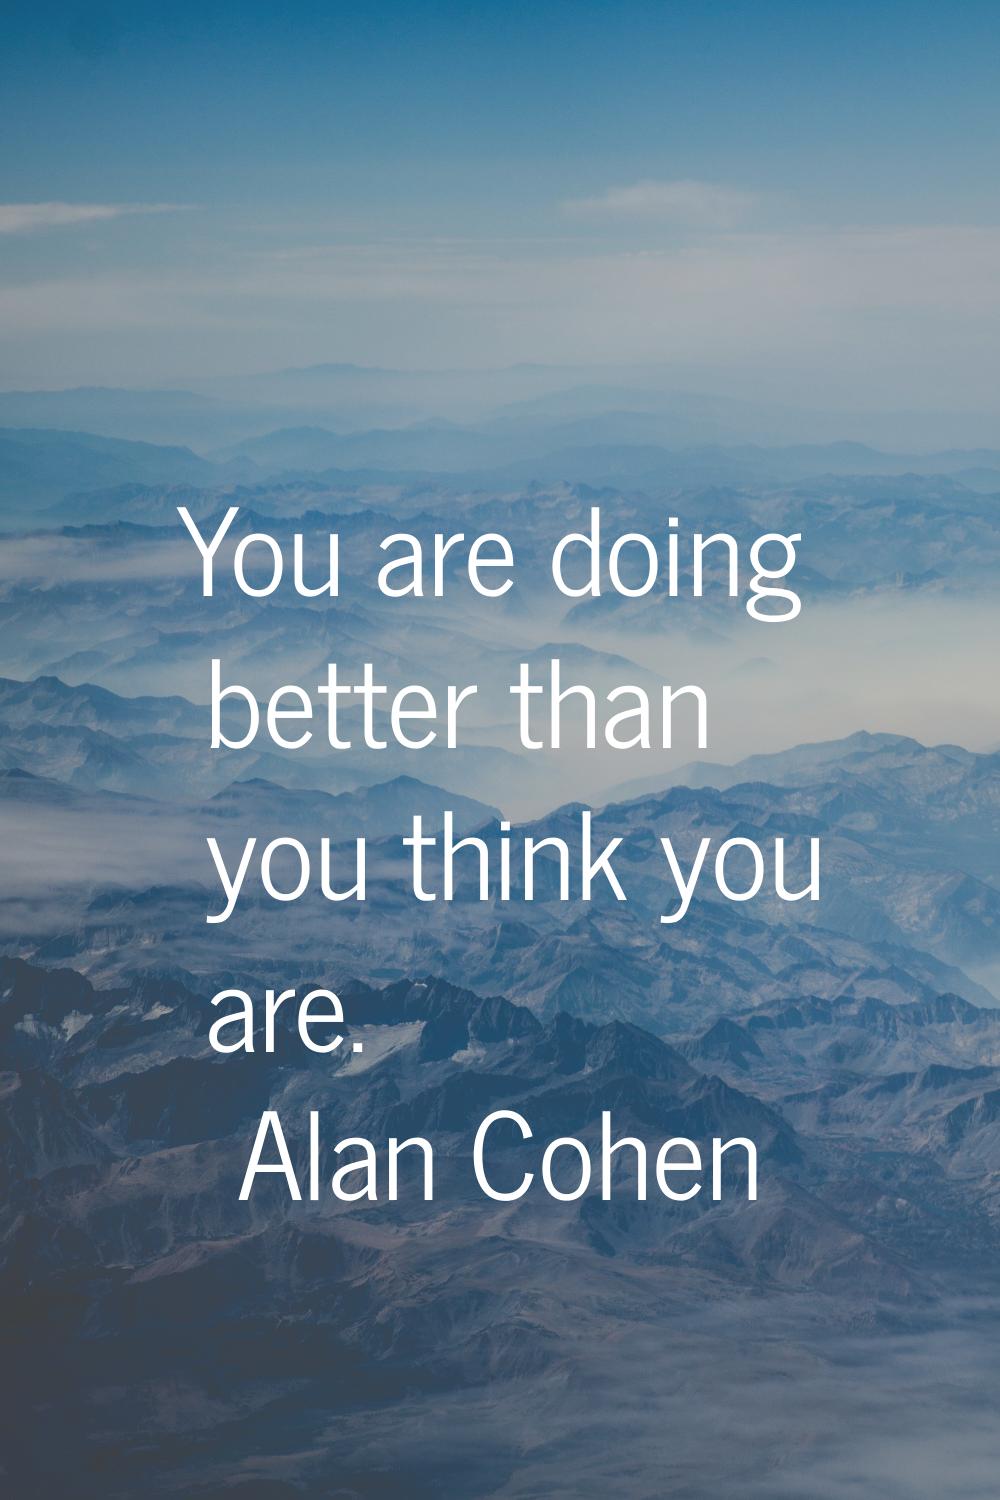 You are doing better than you think you are.